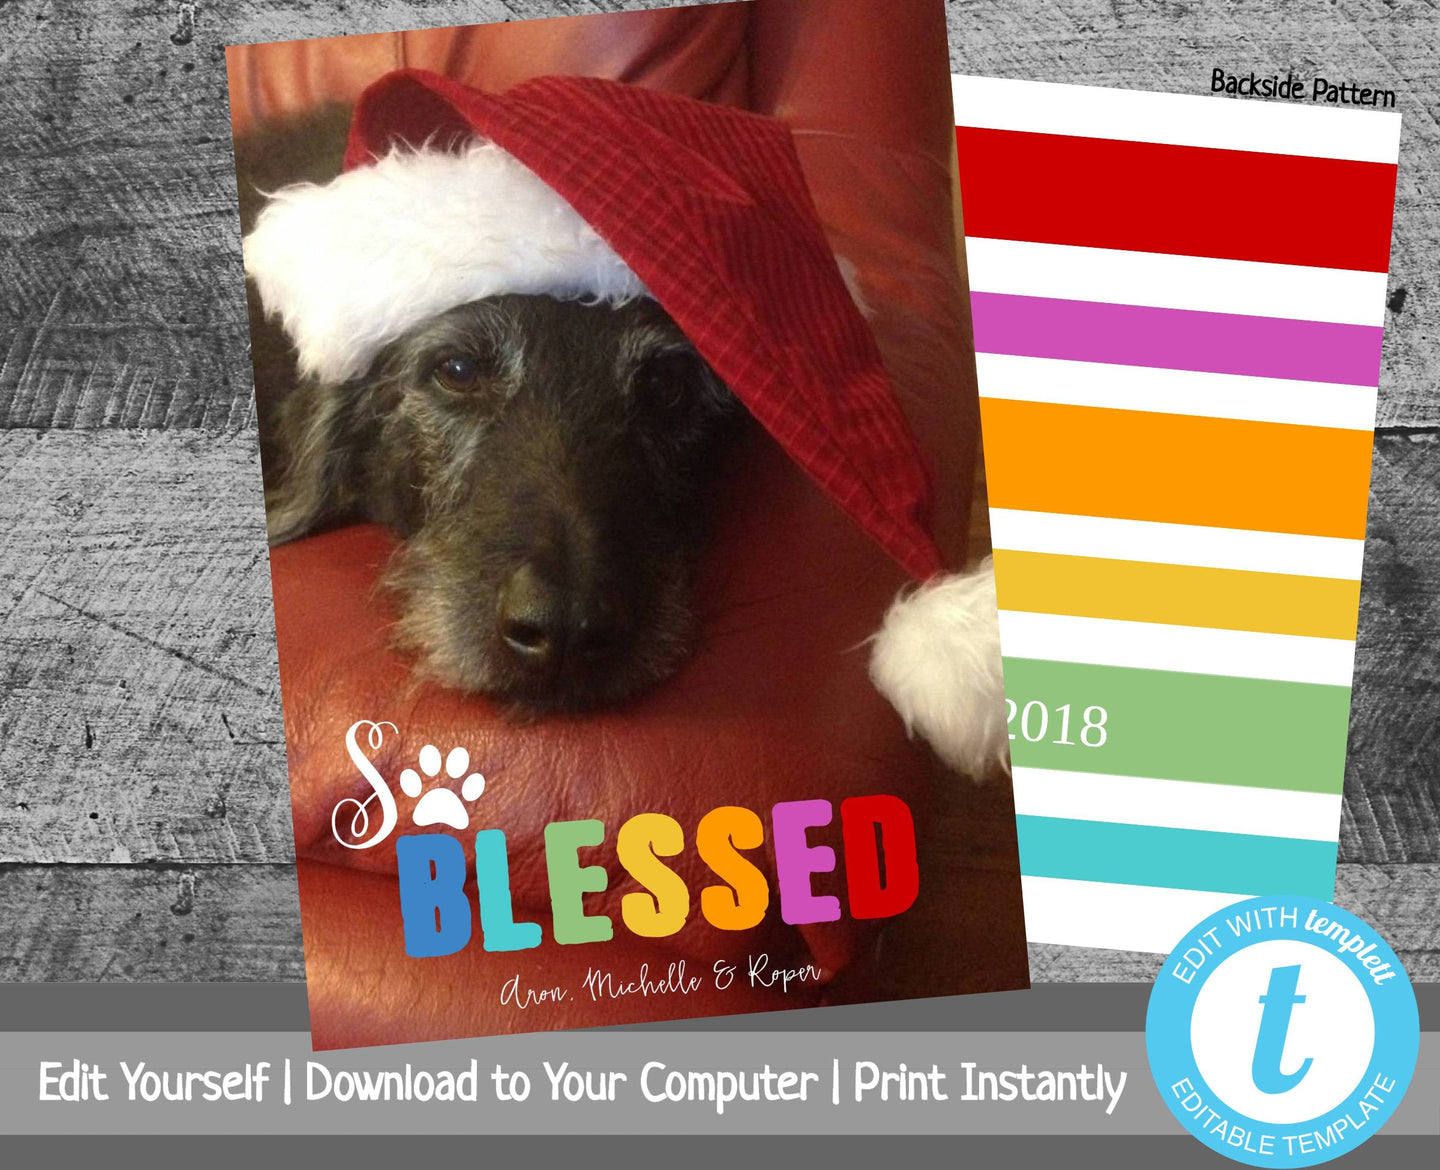 Pet Lover Christmas Card Template, Puppy Photo Christmas Card, Photo Holiday Card, So Blessed, Printable Dog Xmas Card, Colorful Stripes